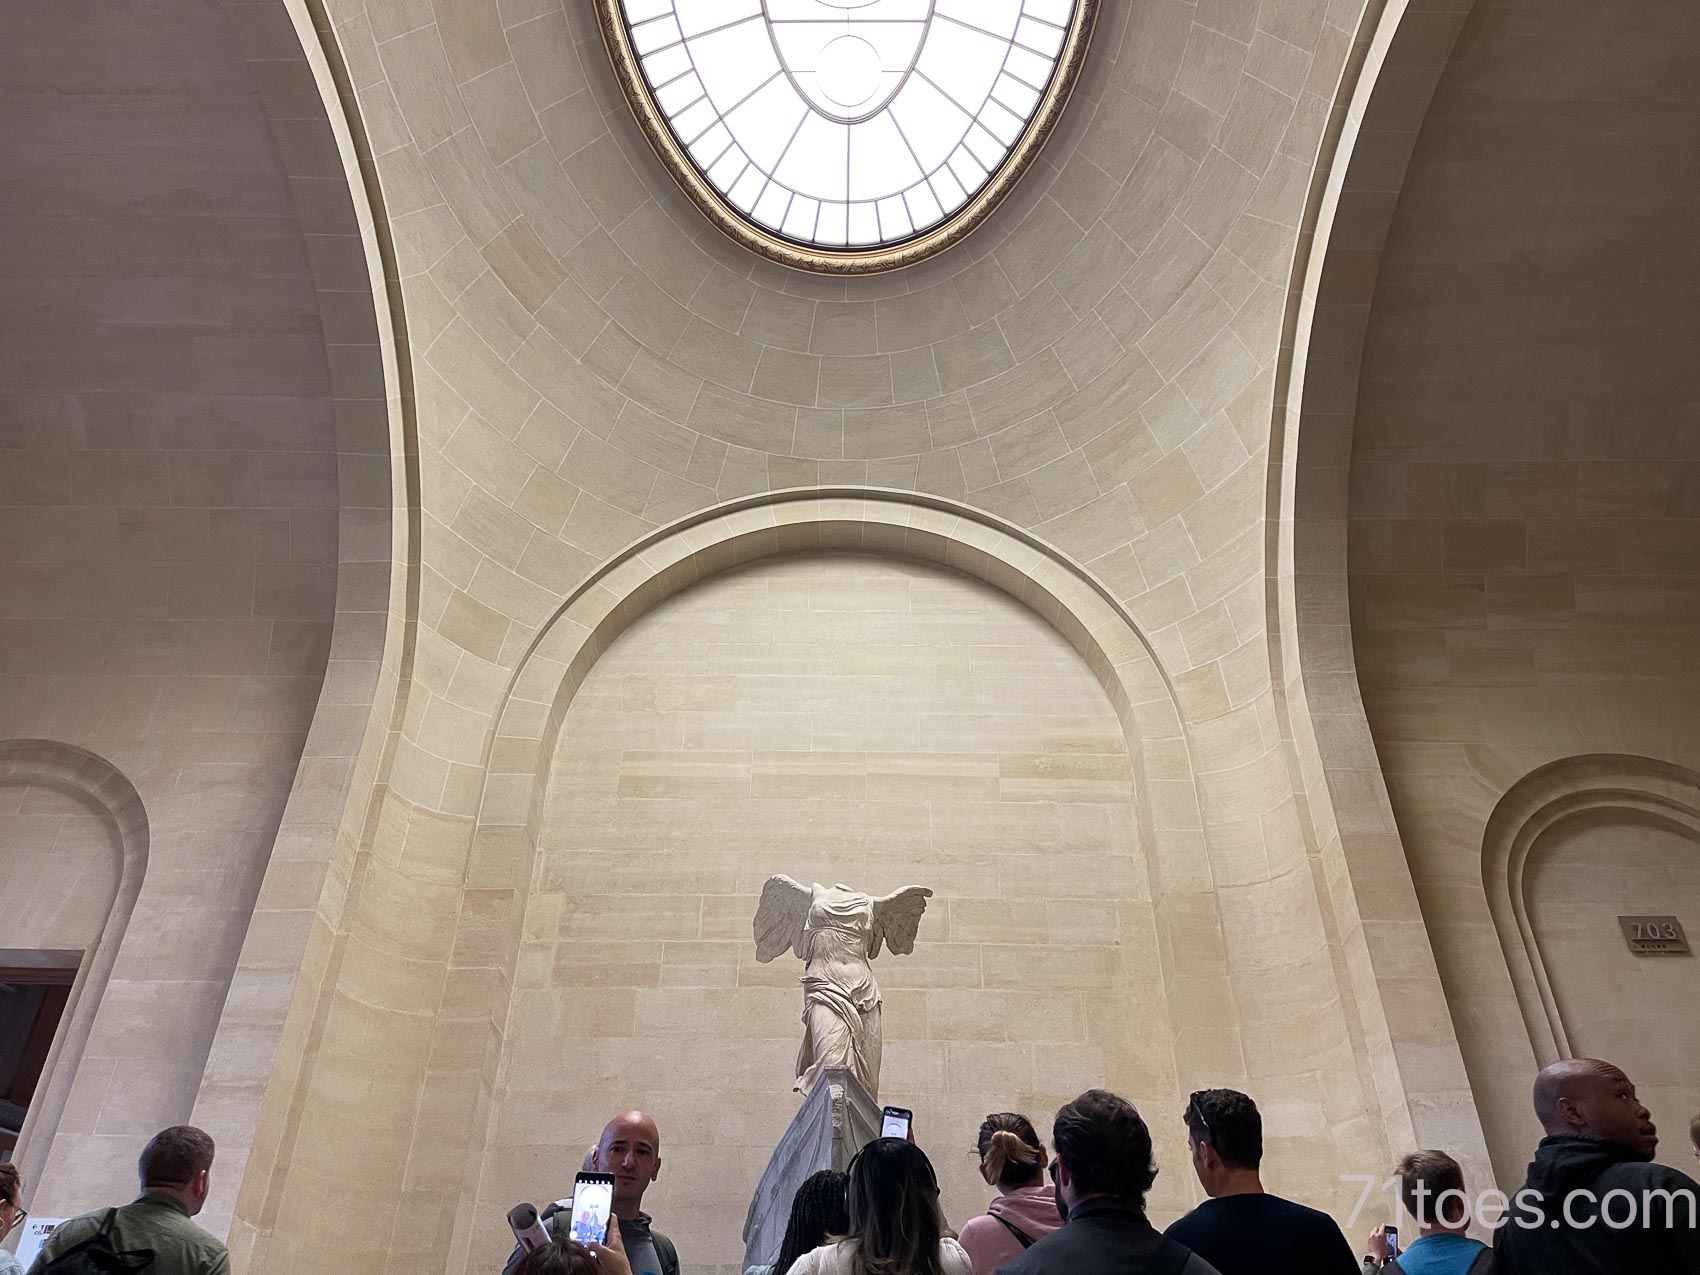 the statue of Winged Victory, also called Nike of Samothrace. 